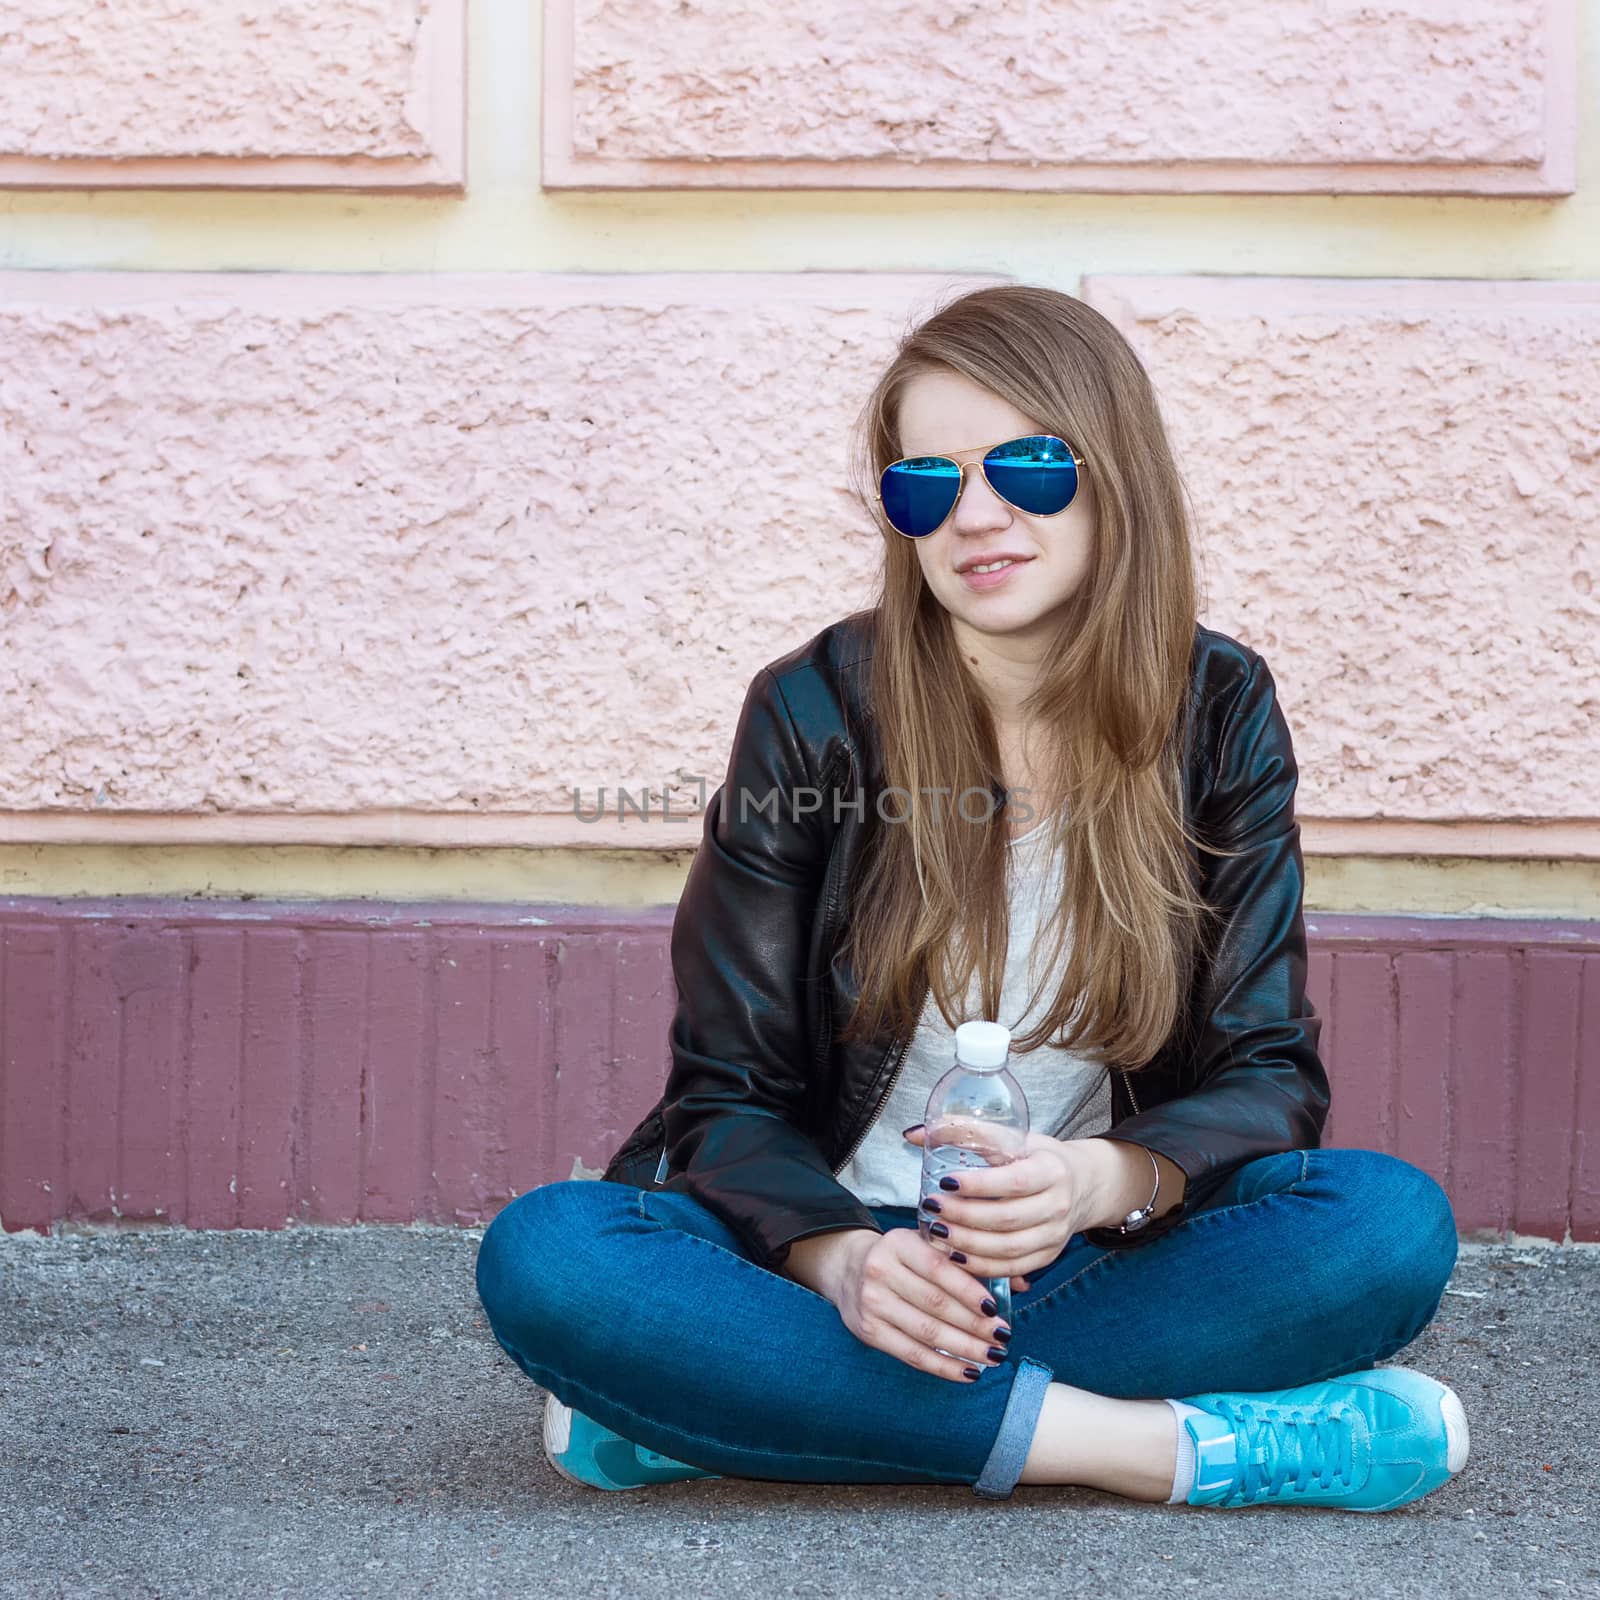 Girl in jacket, jeans and sunglasses sitting on the pavement